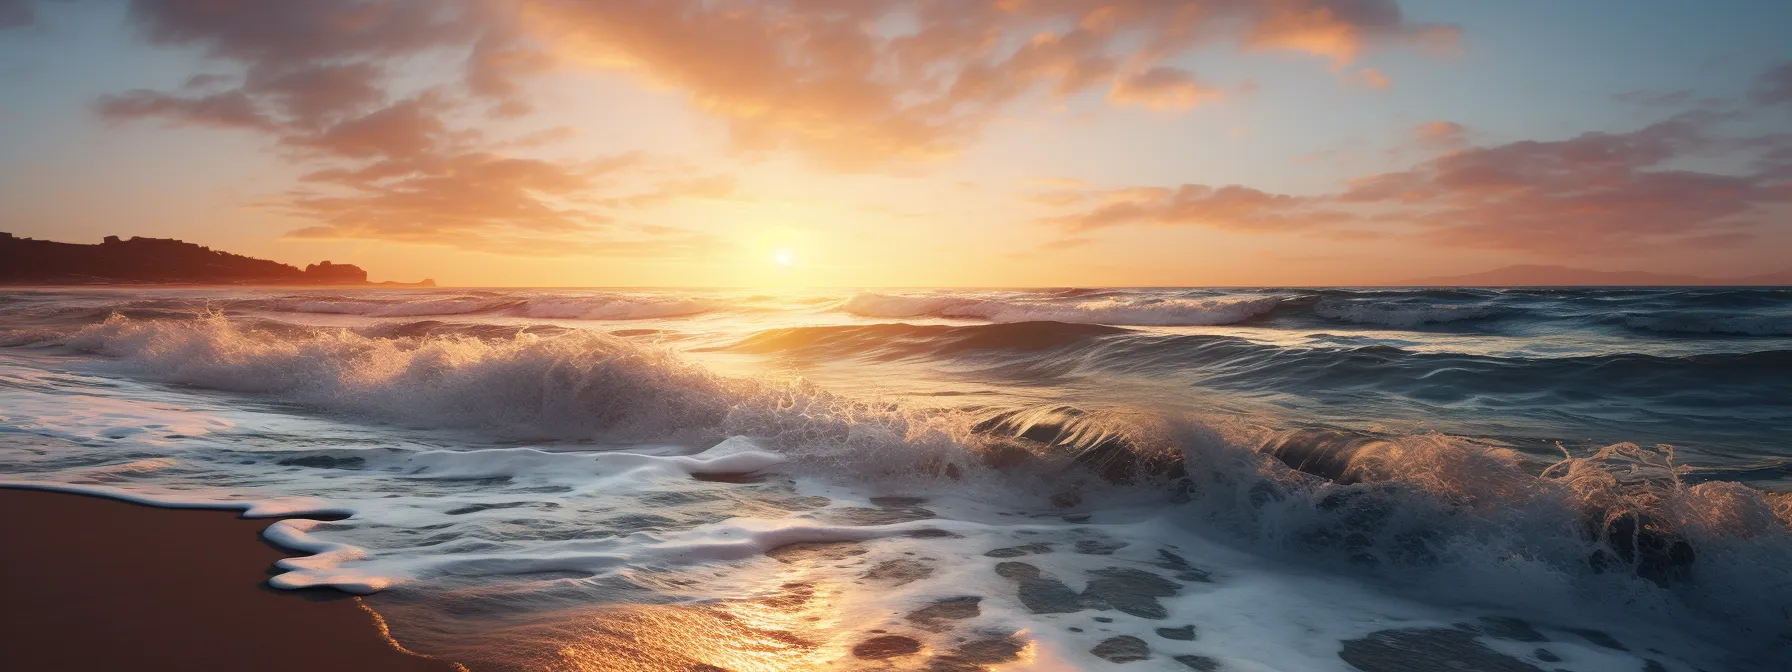 a beautiful sunset over a serene beach with waves crashing onto the shore.